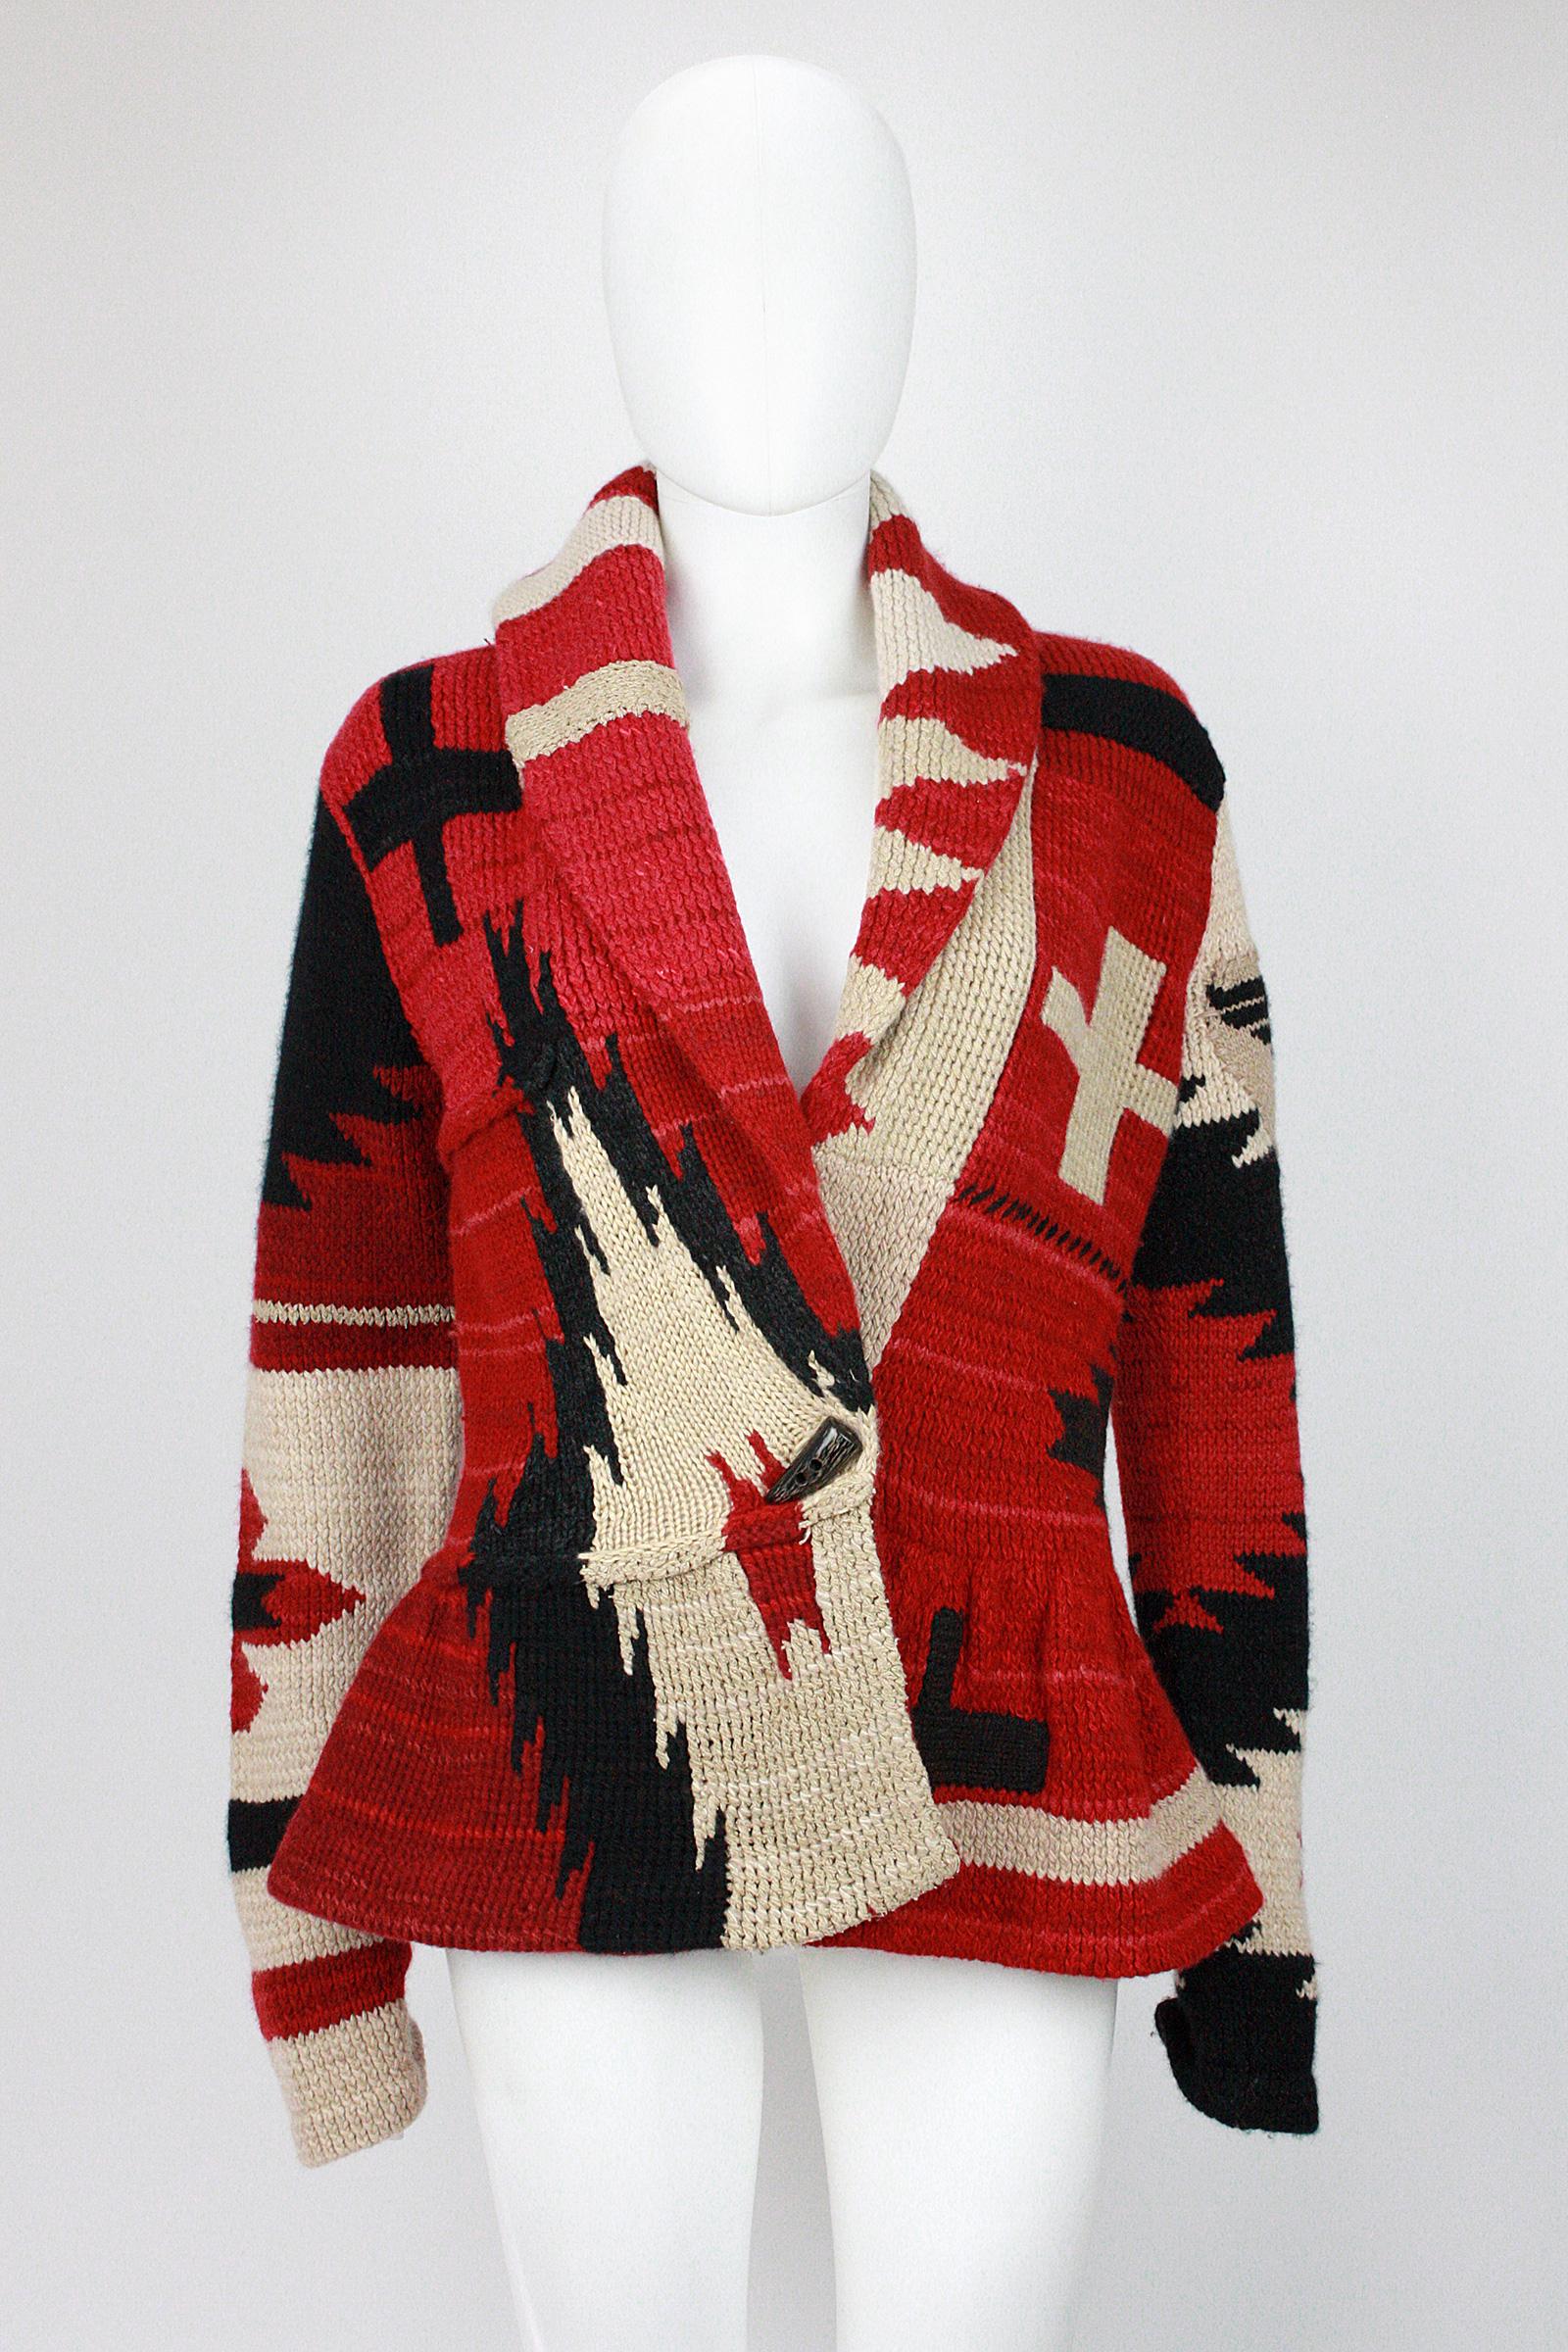 Ralph Lauren Collection
Knit cardigan with peplum
Shawl collar
Extra long sleeves 
Soft thick weave that stretches
Cashmere blend
Southwest pattern 
Stylized chunky wood button
New with tags